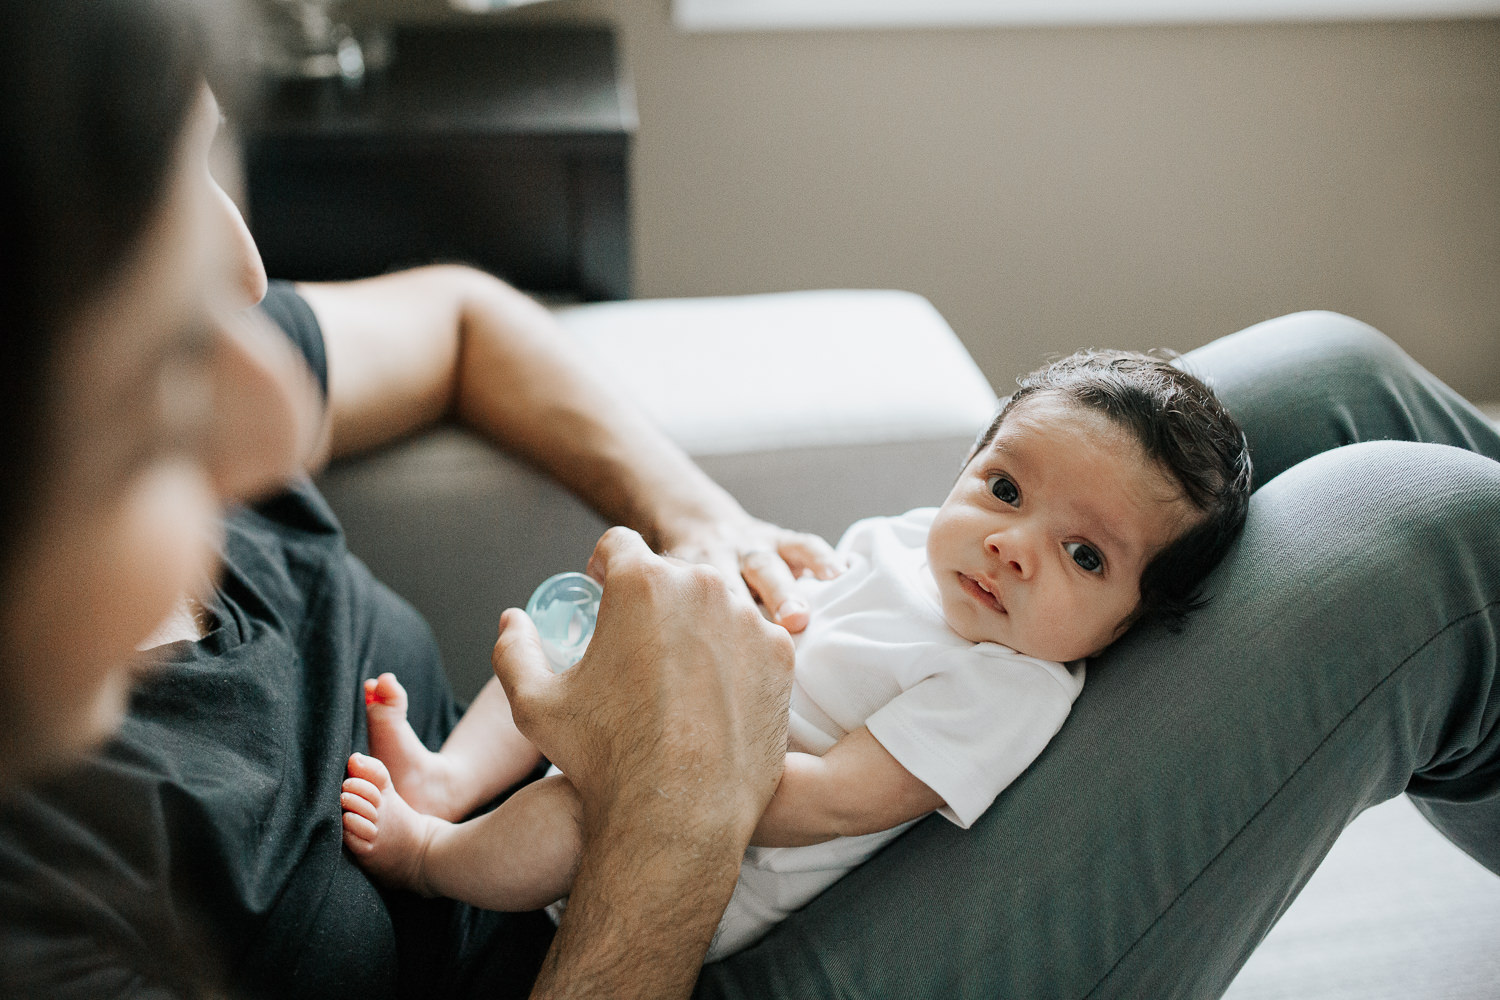 new parents sitting on couch, 1 month old baby boy in onesie with dark hair lying on dad's lap, baby looking at camera - Markham Lifestyle Photos